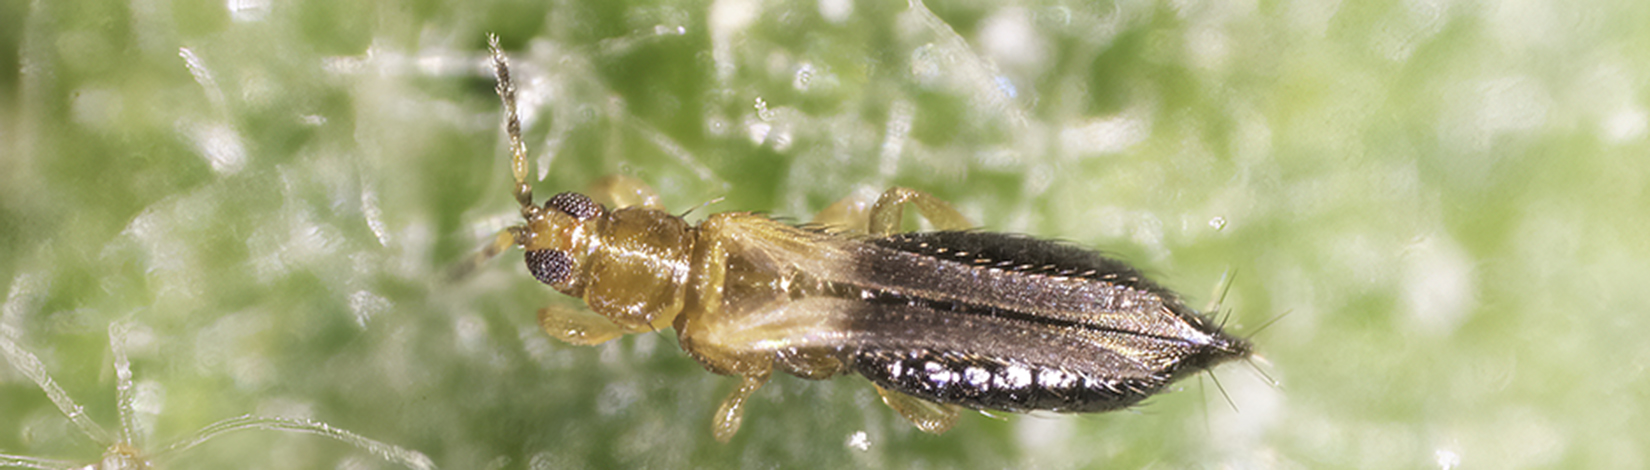 Watch for Thrips parvispinus in Georgia